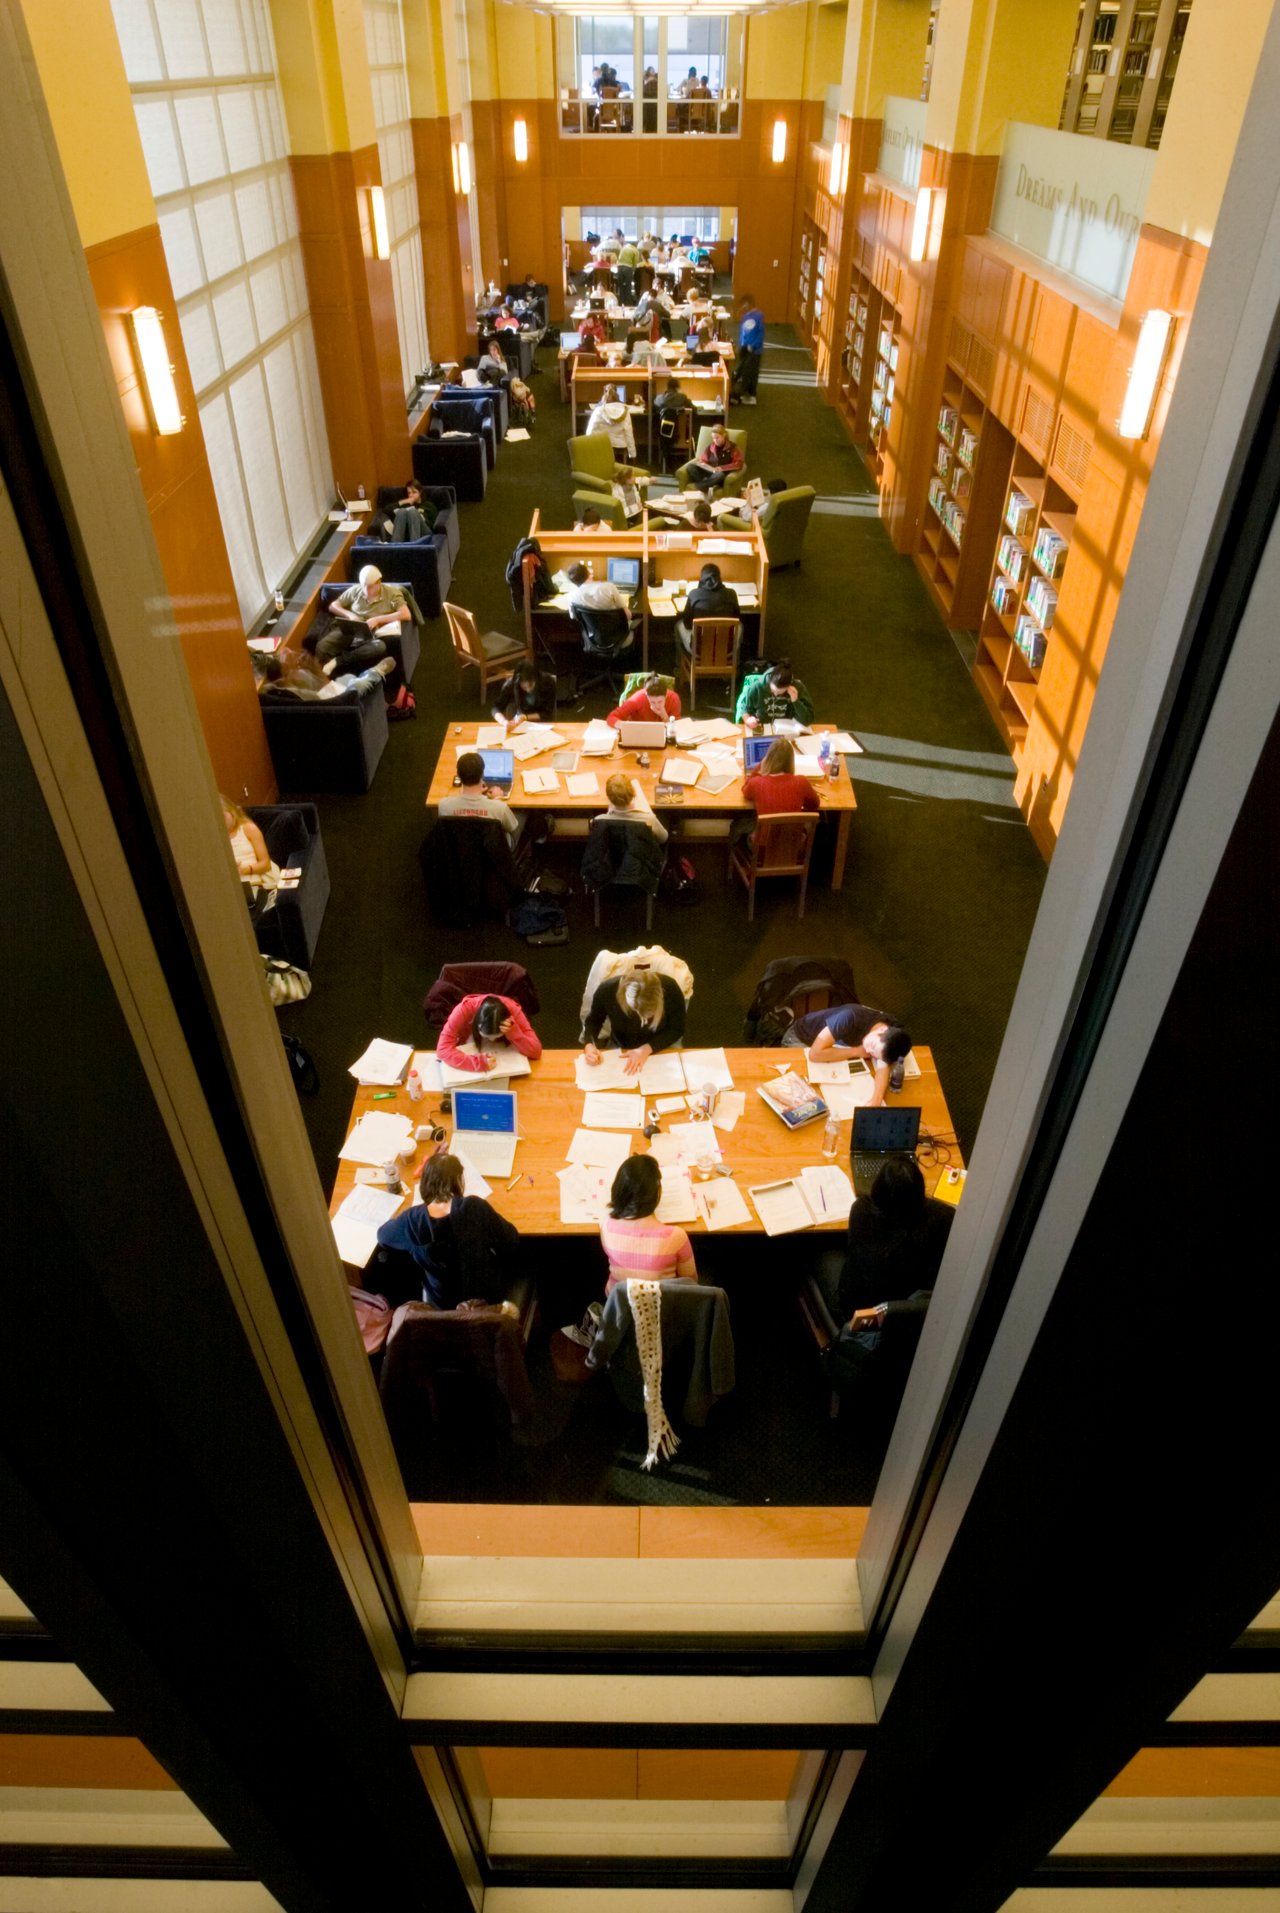 Students sit at tables strewn with papers and laptops in a section of Bostock library